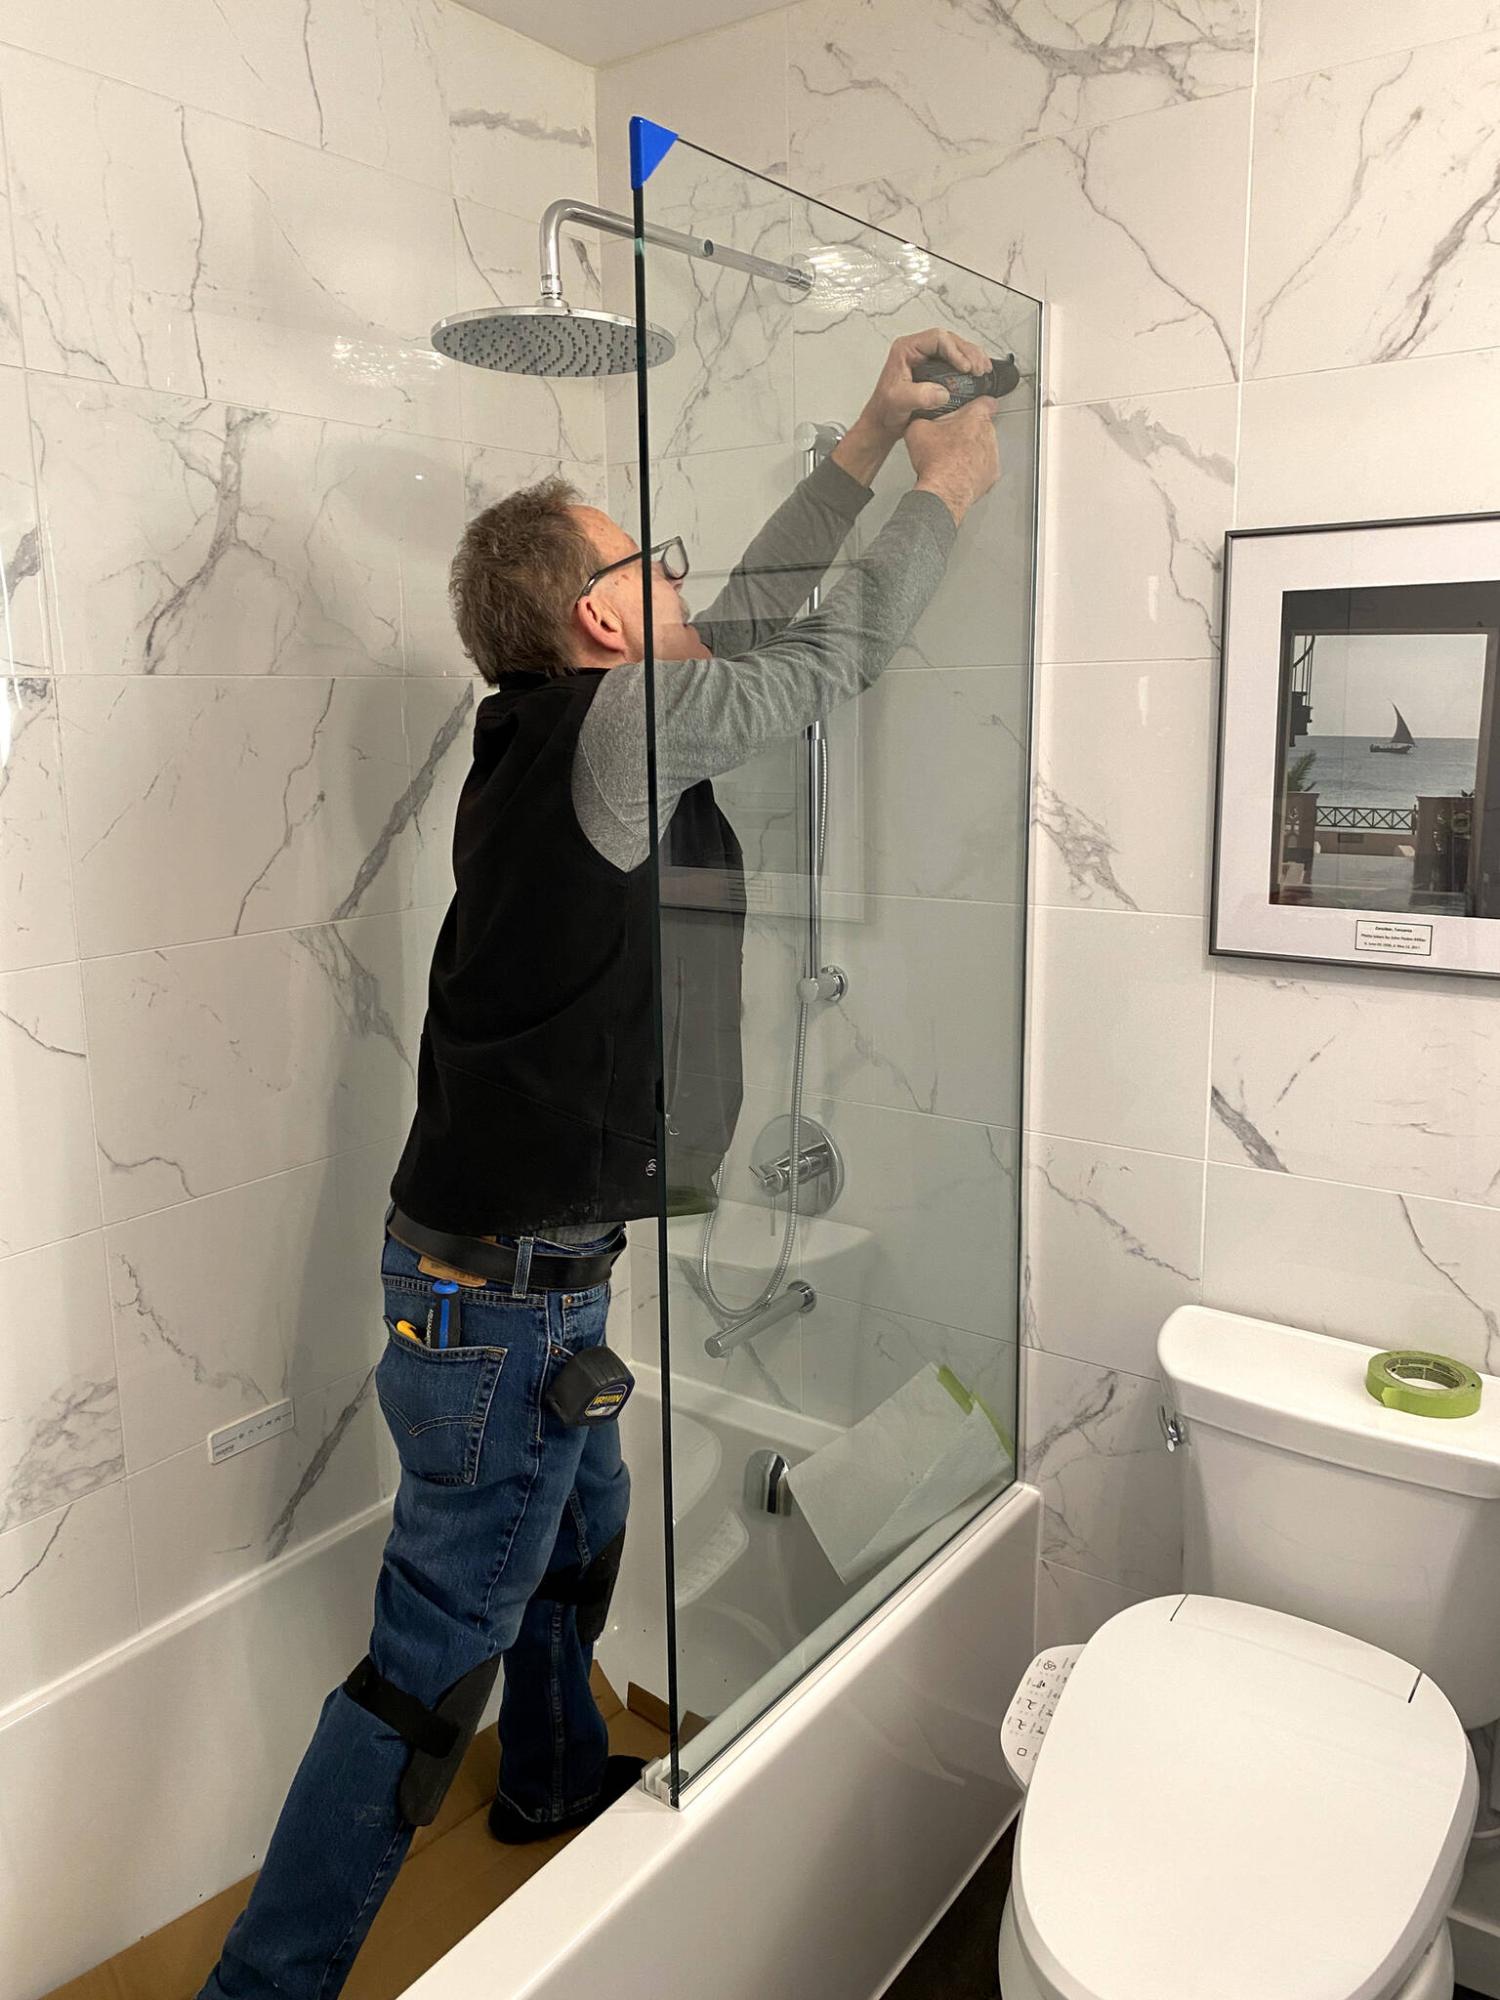  <p>Dale Gallant from SHODOR shows his prowess and expertise while mounting a glass panel for the custom shower enclosure.</p> 